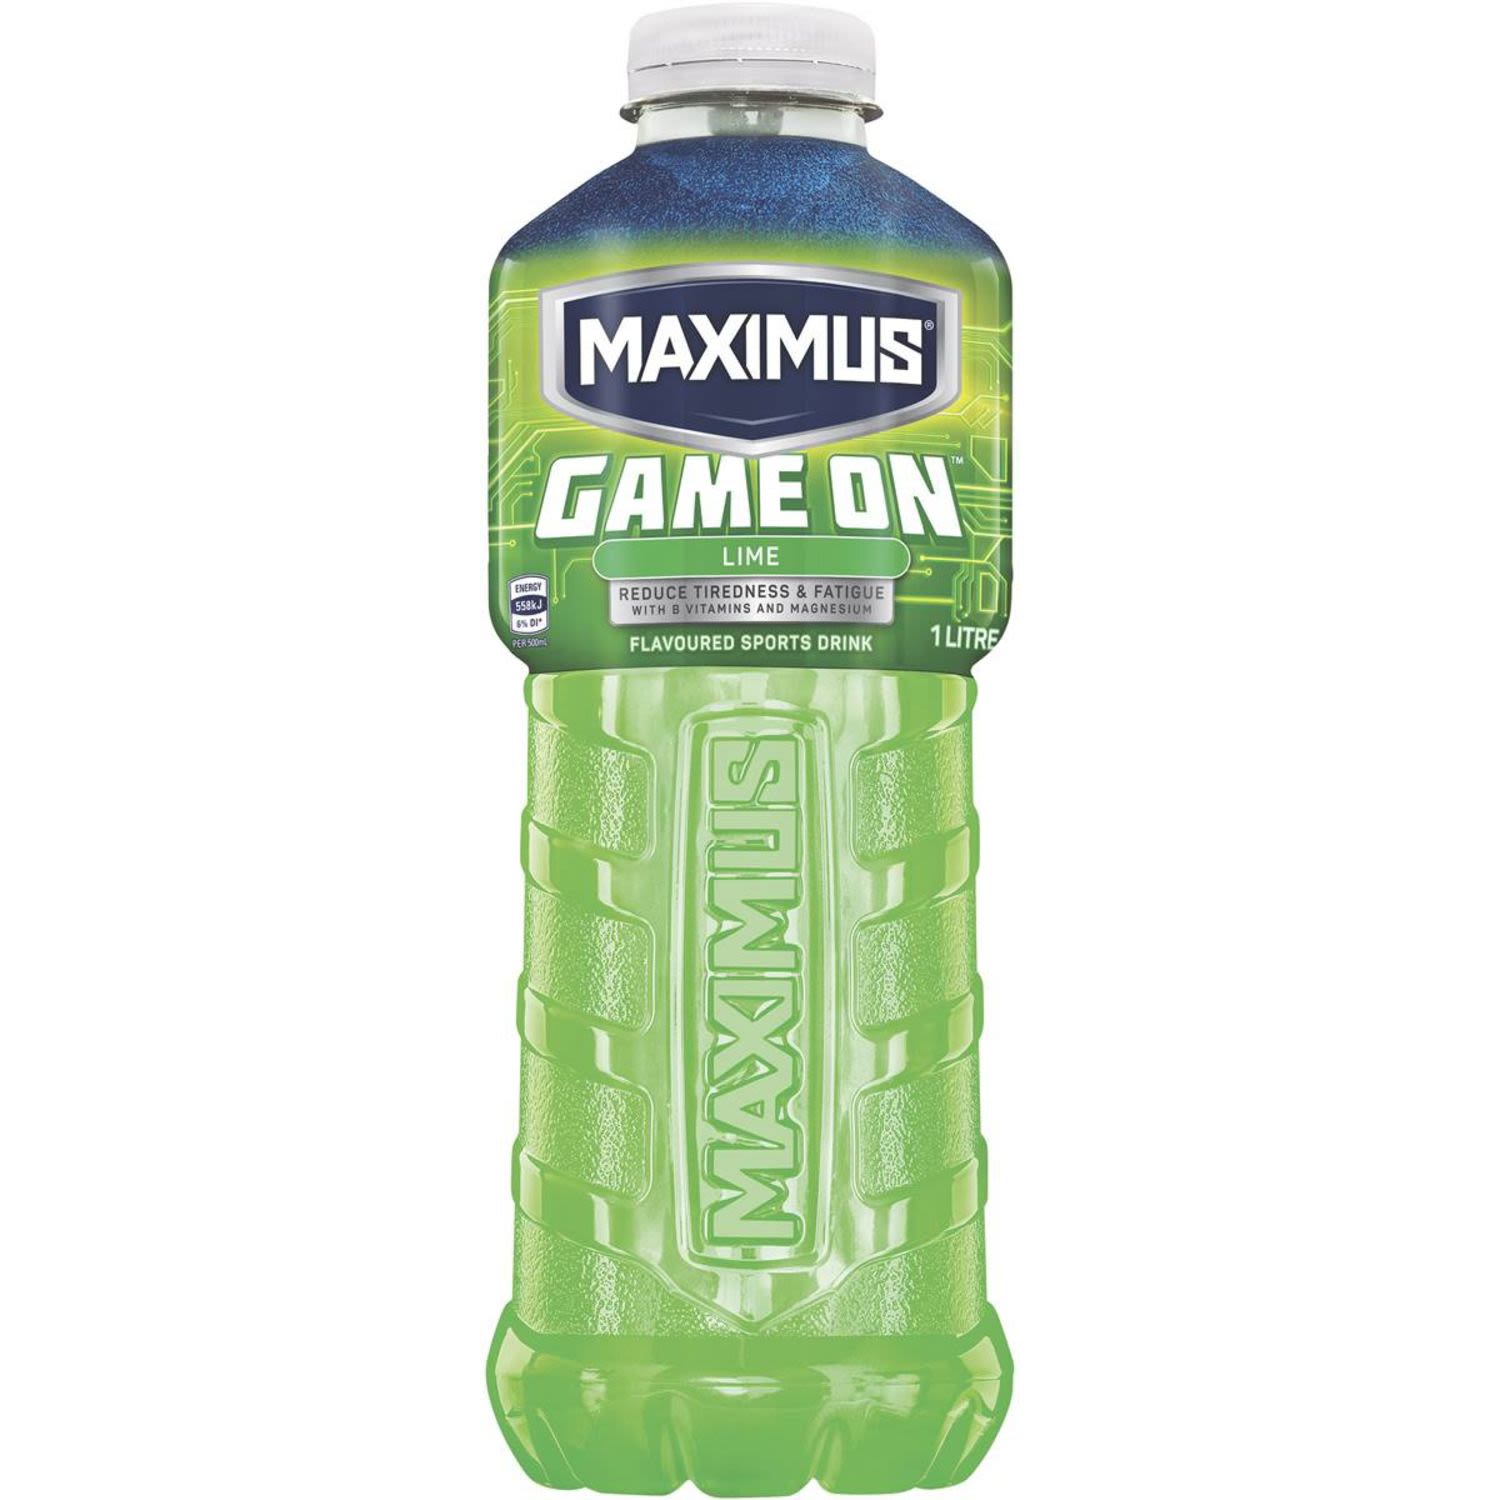 Maximus Game On Lime, 1 Litre